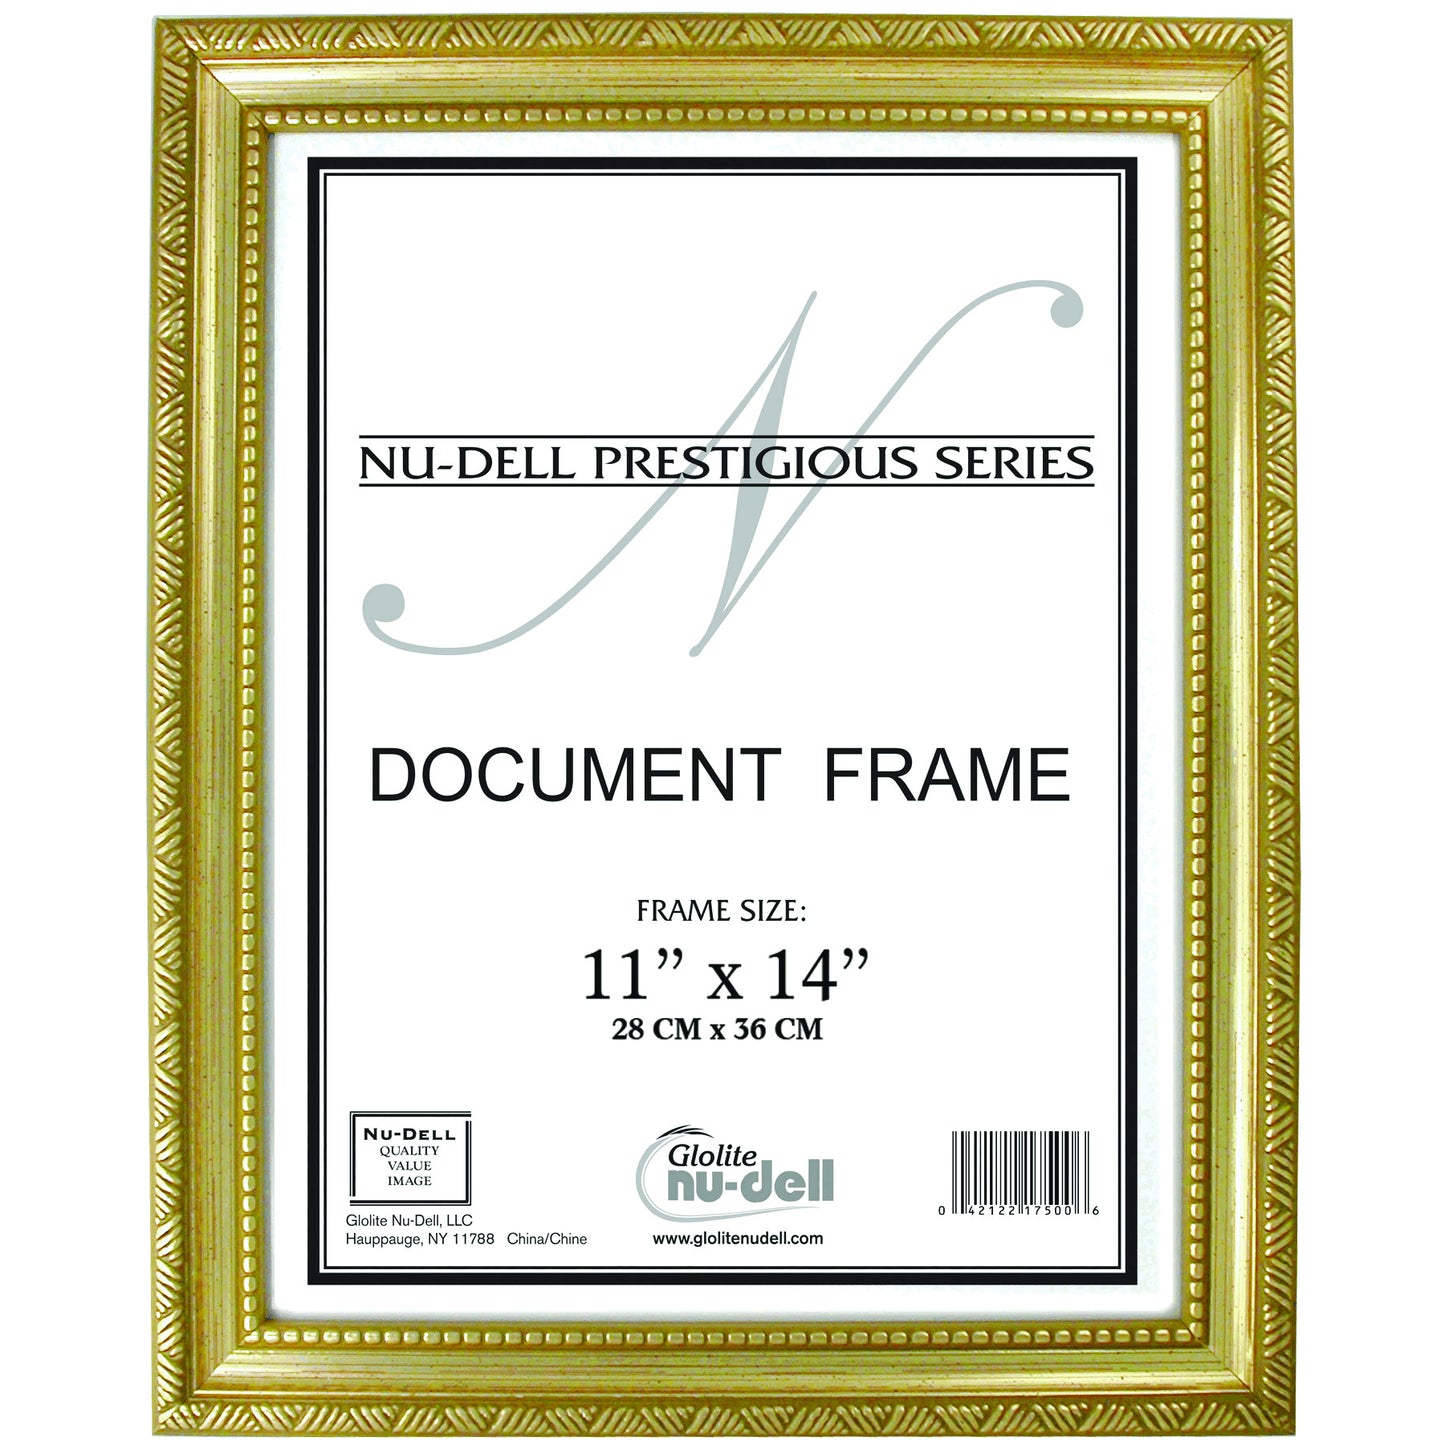 Prestigious Traditional Document Gold Frame with Plastic Cover 11" x 14"